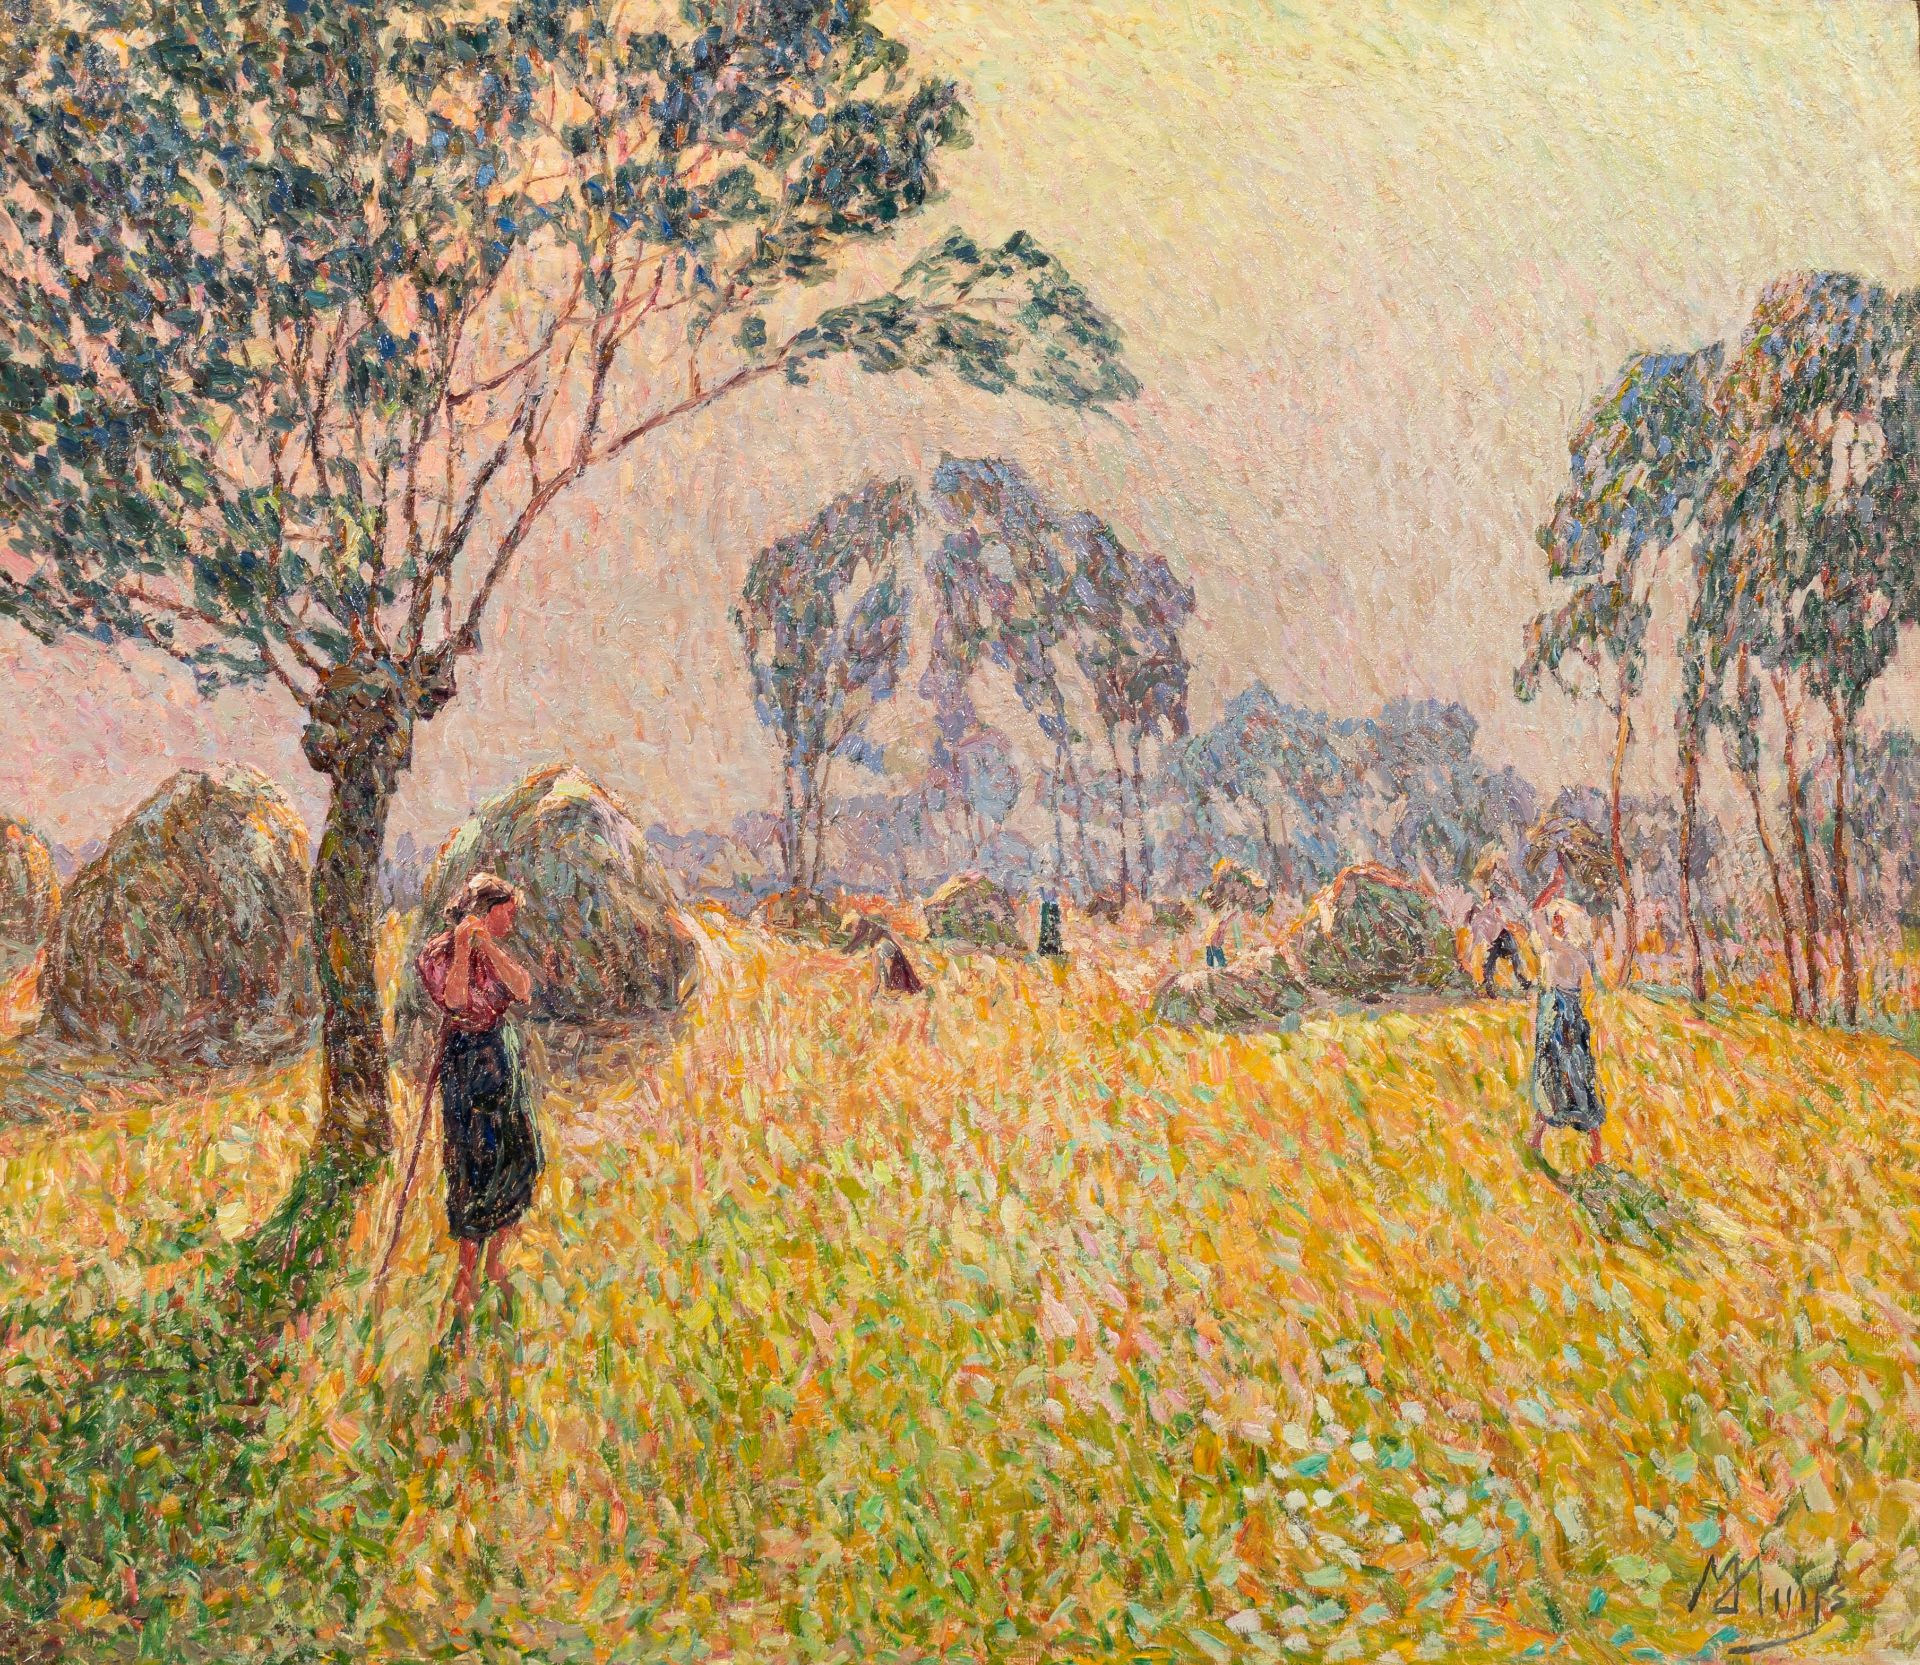 Modest Huys (1874-1932), 'De Oogst', the harvest, ca. 1912, oil on canvas, 71 x 82 cm